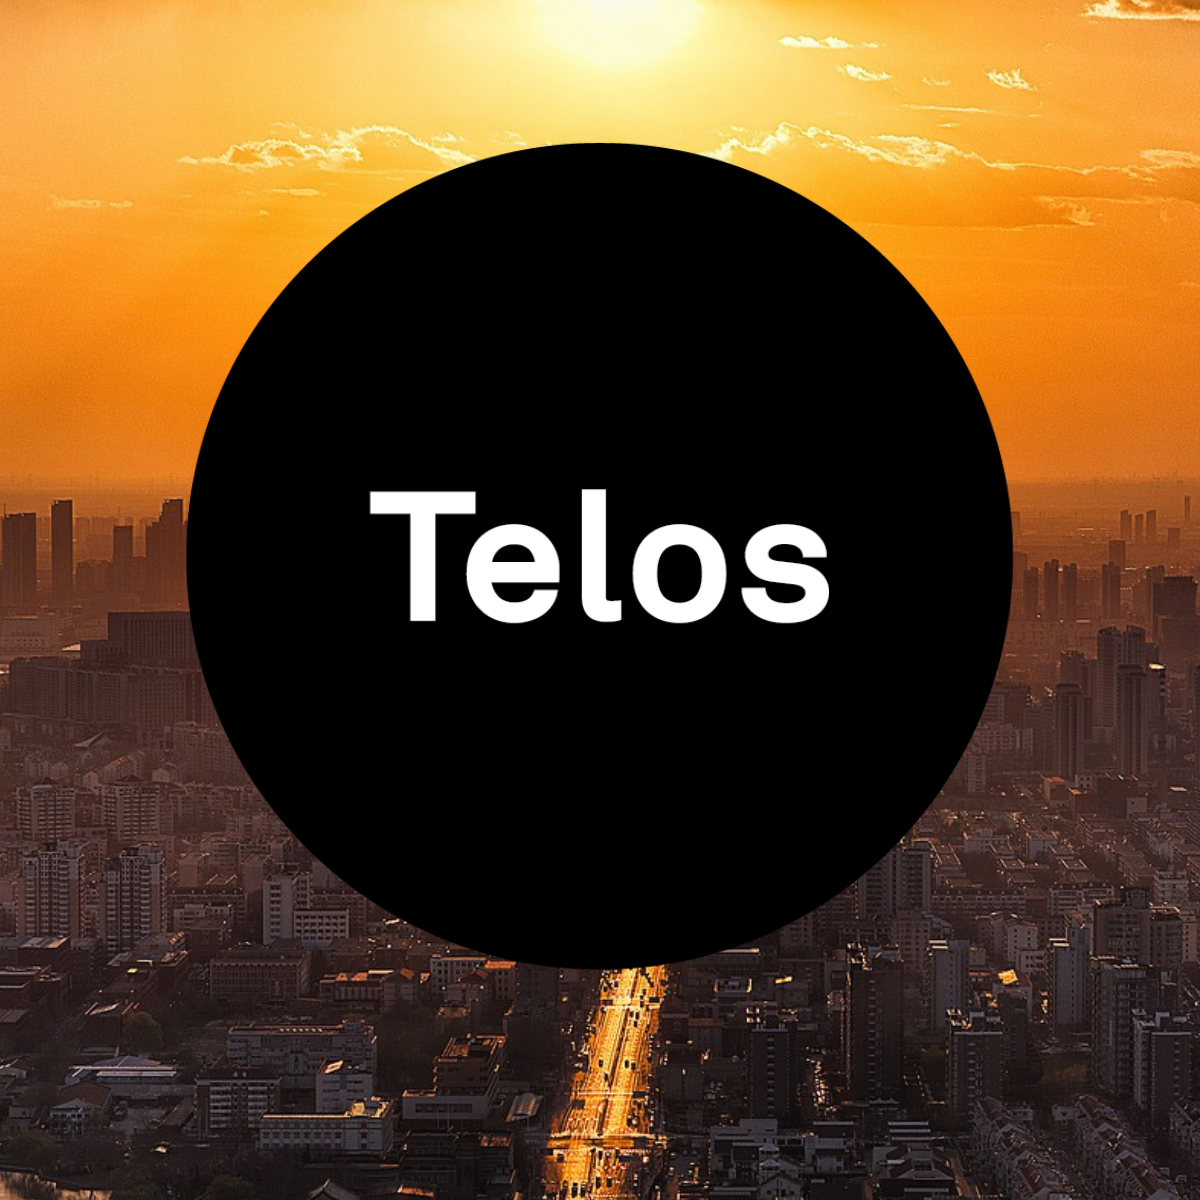 The Telos logo a black circle with the word telos on it superimposed over a cityscape at sunset